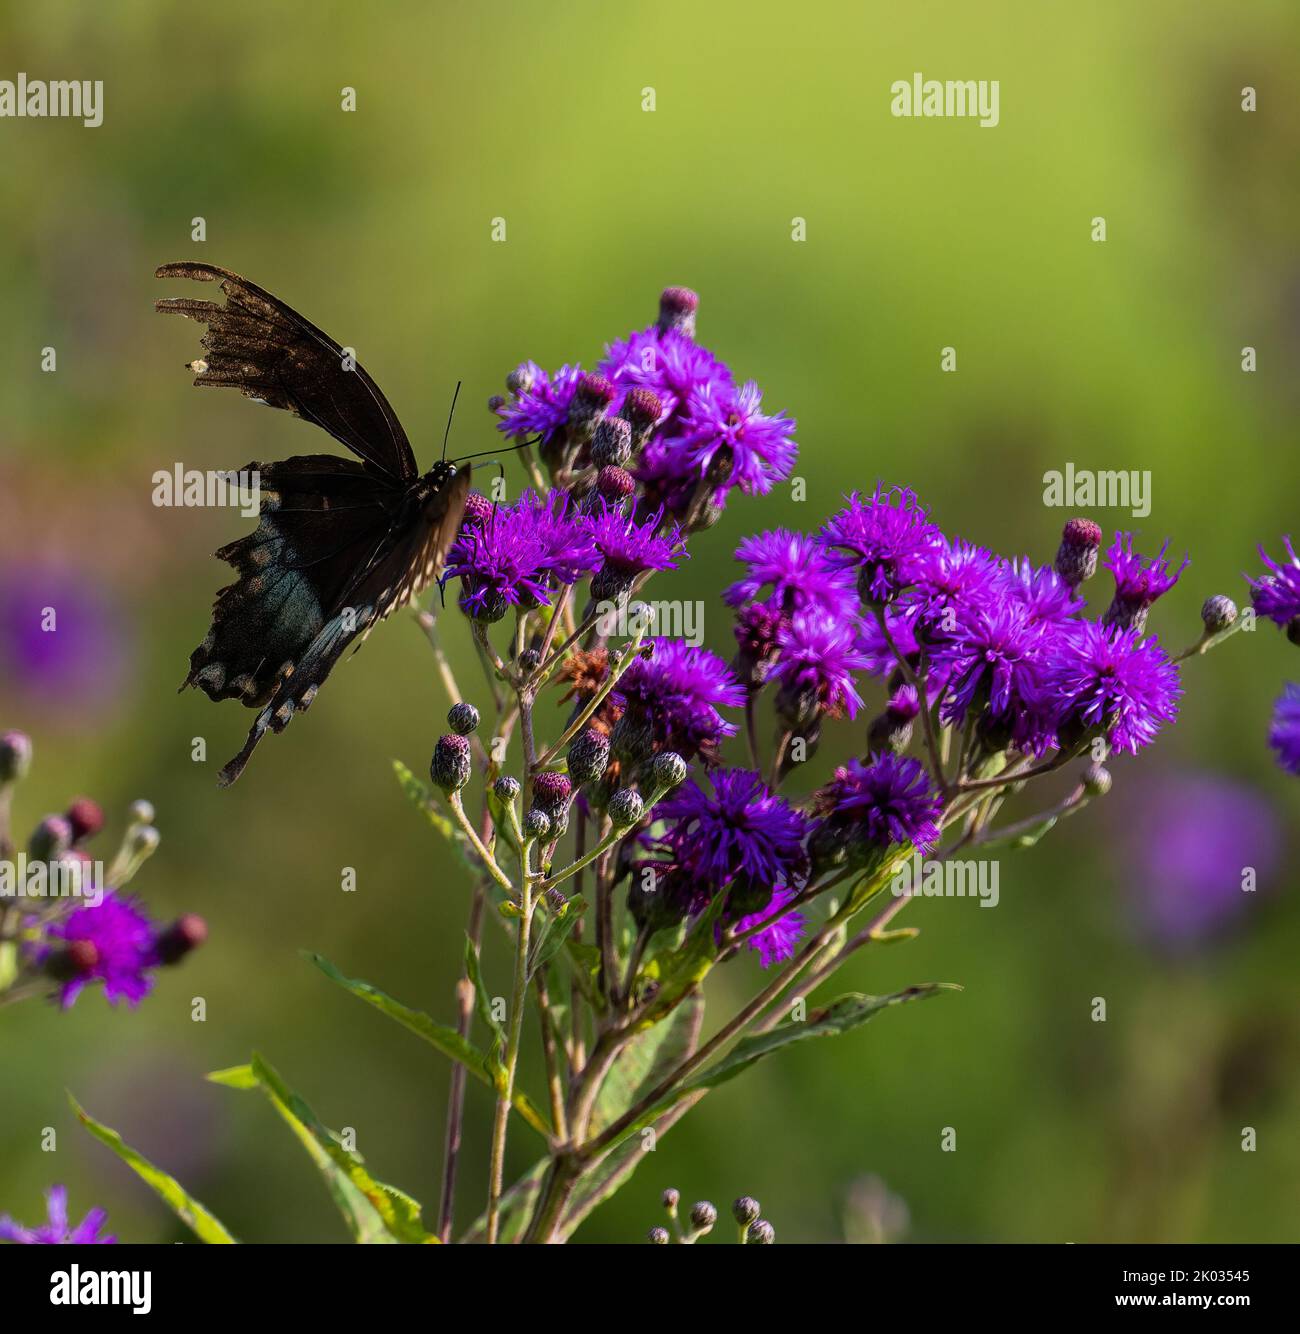 A beautiful Eastern tiger swallowtail on Ironweeds flowers in the garden with blur background Stock Photo